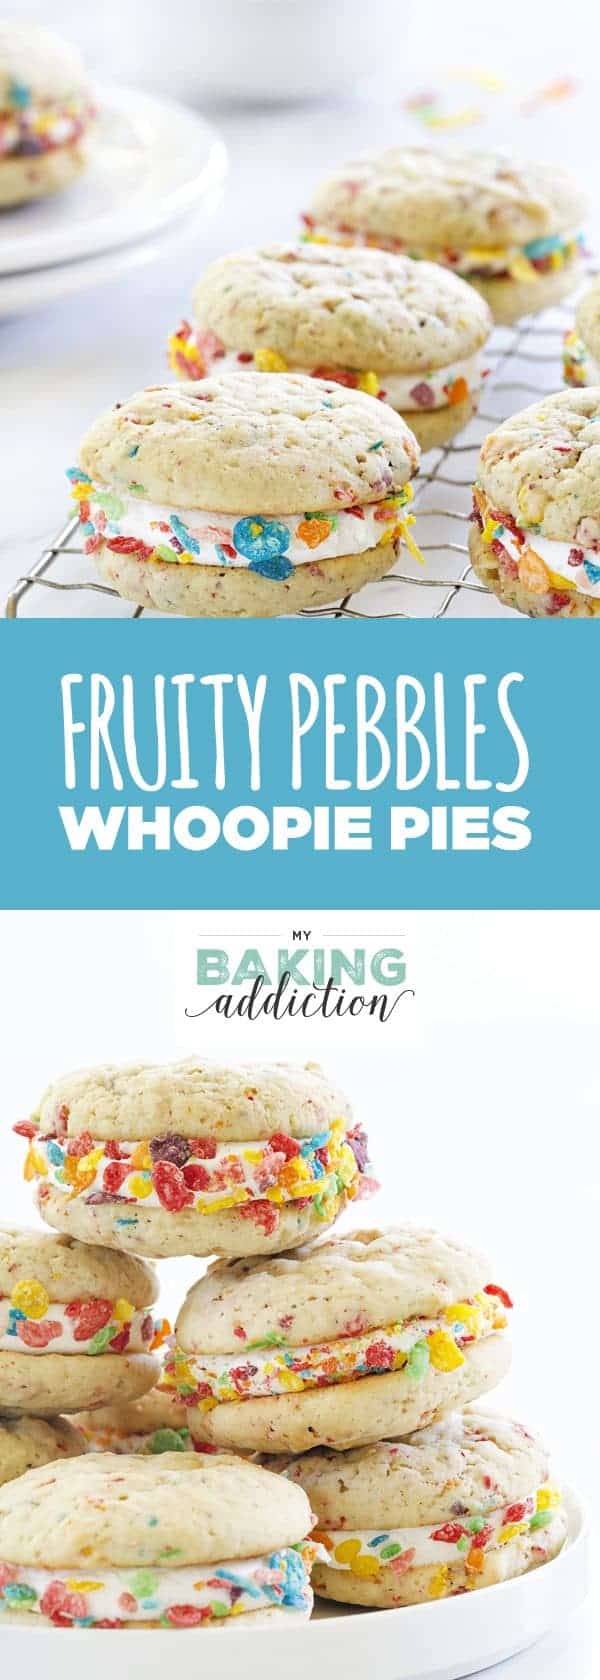 Fruity Pebbles Whoopie Pies are a delicious and fun spin on a classic dessert. The marshmallow buttercream is incredible!